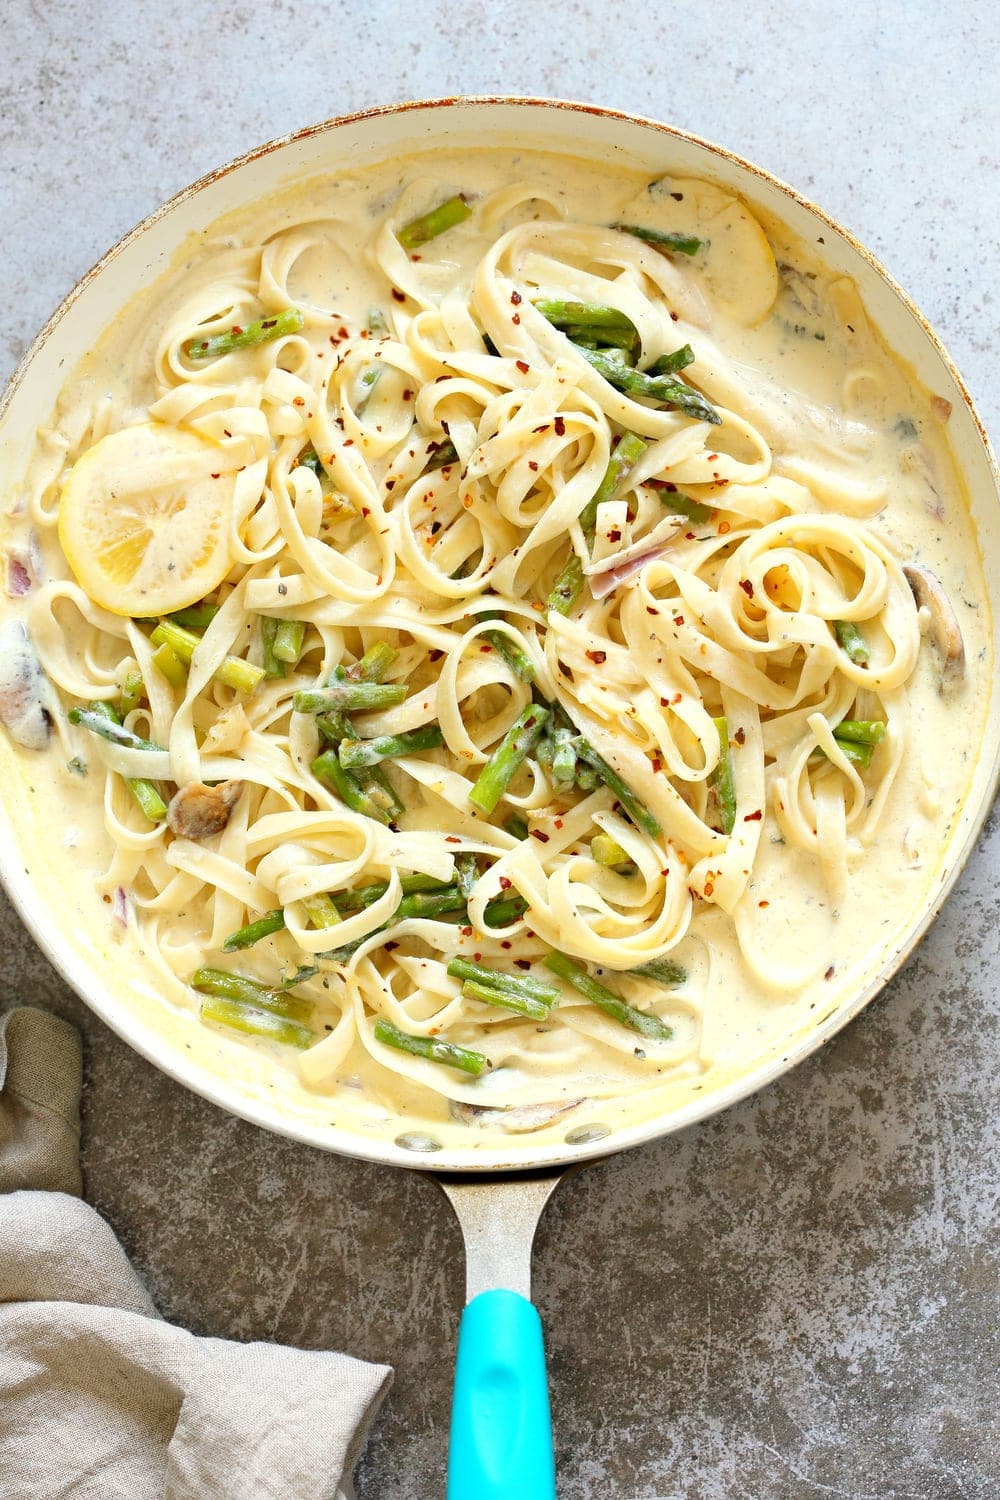 Skillet of creamy lemon pasta with asparagus, lemon slices and red pepper flakes.